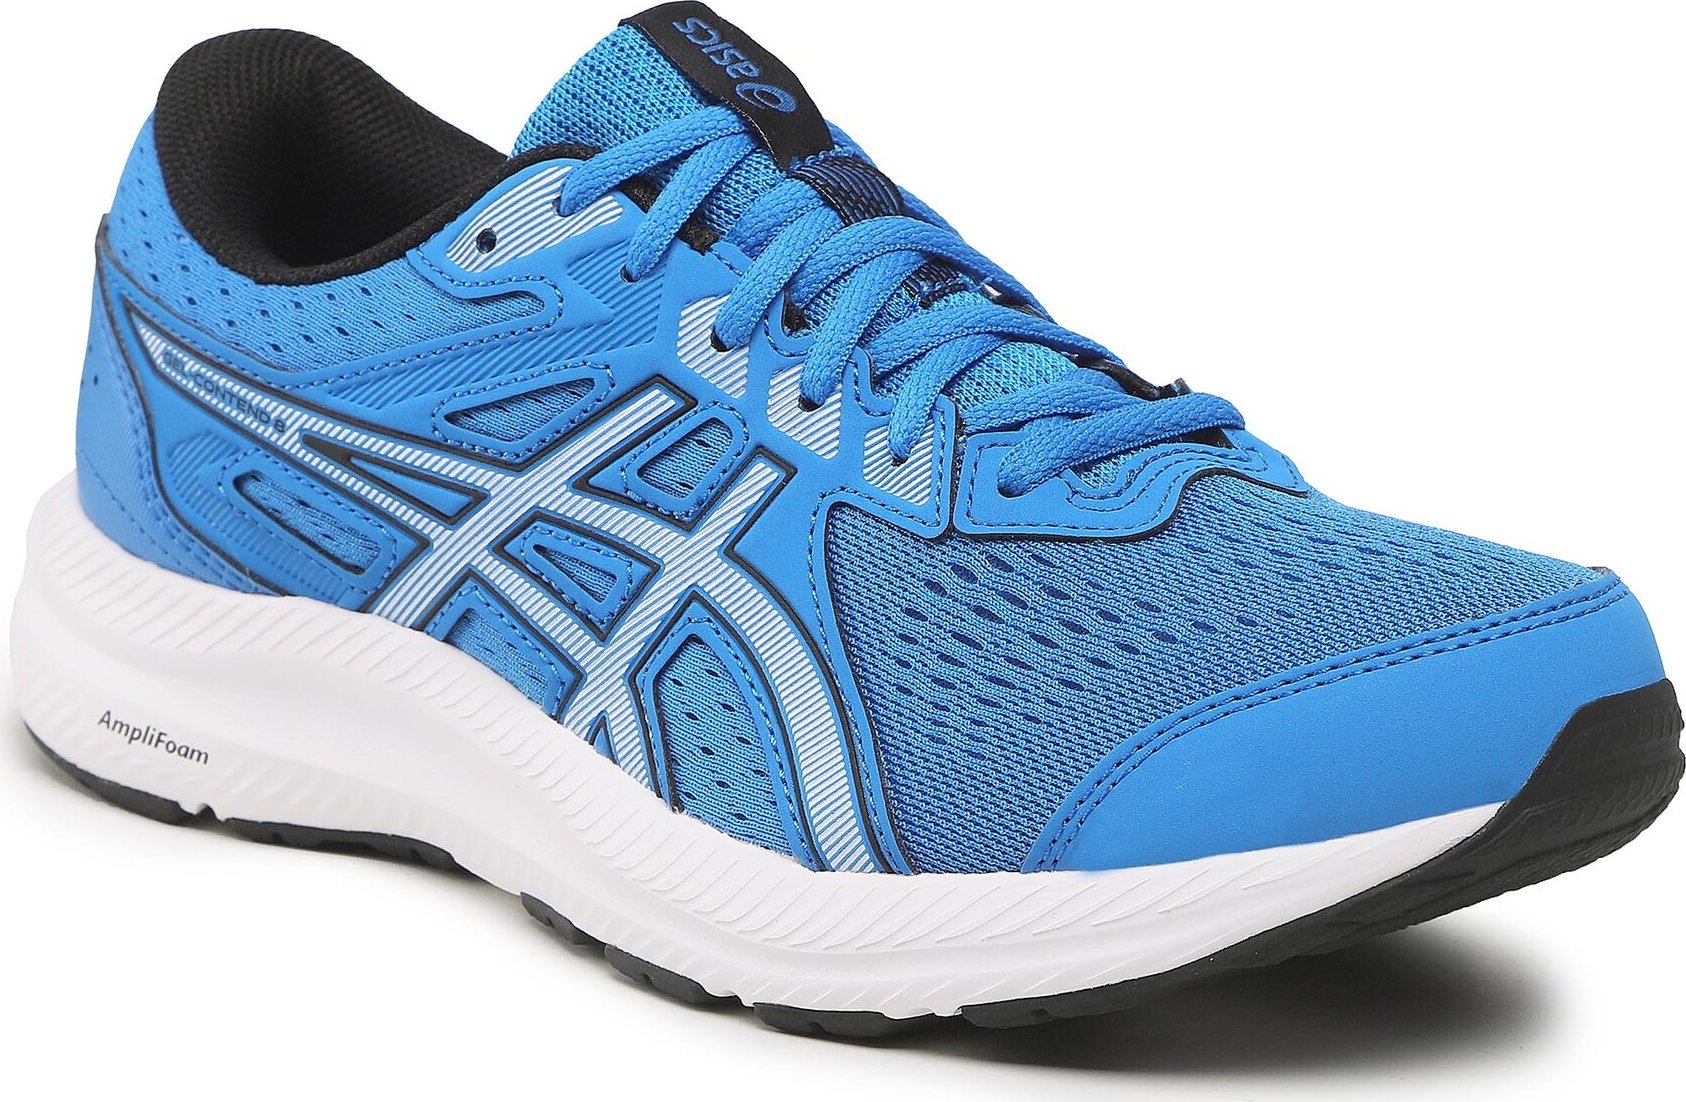 Boty Asics Gel-Contend 8 1011B492 Electric Blue/White 401